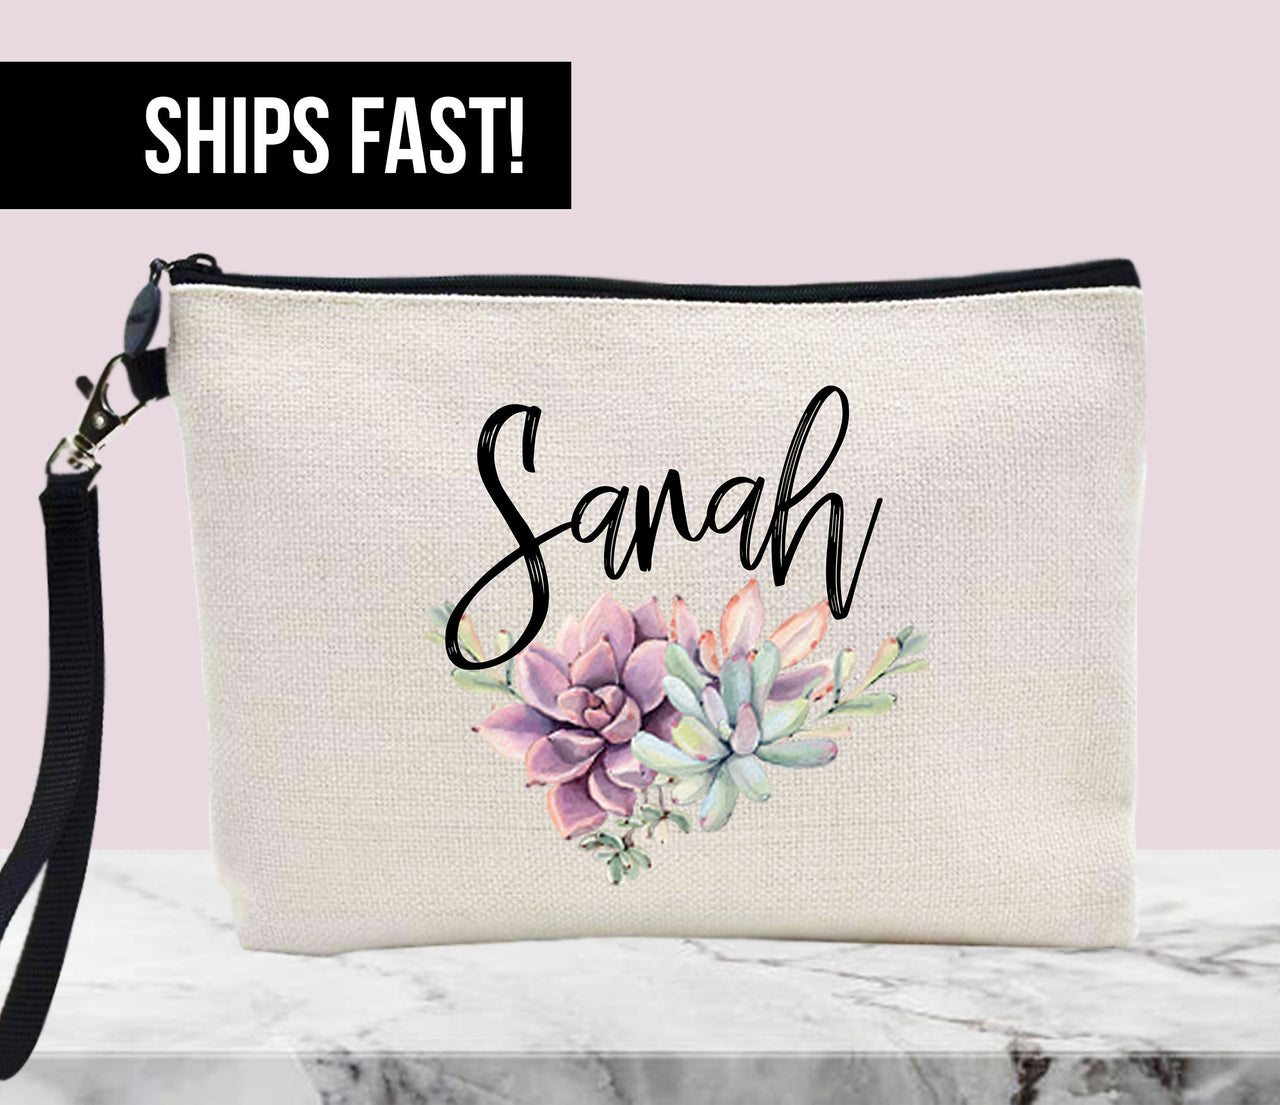 Personalized Make Up Bag with Zipper and wristlet strap with clip